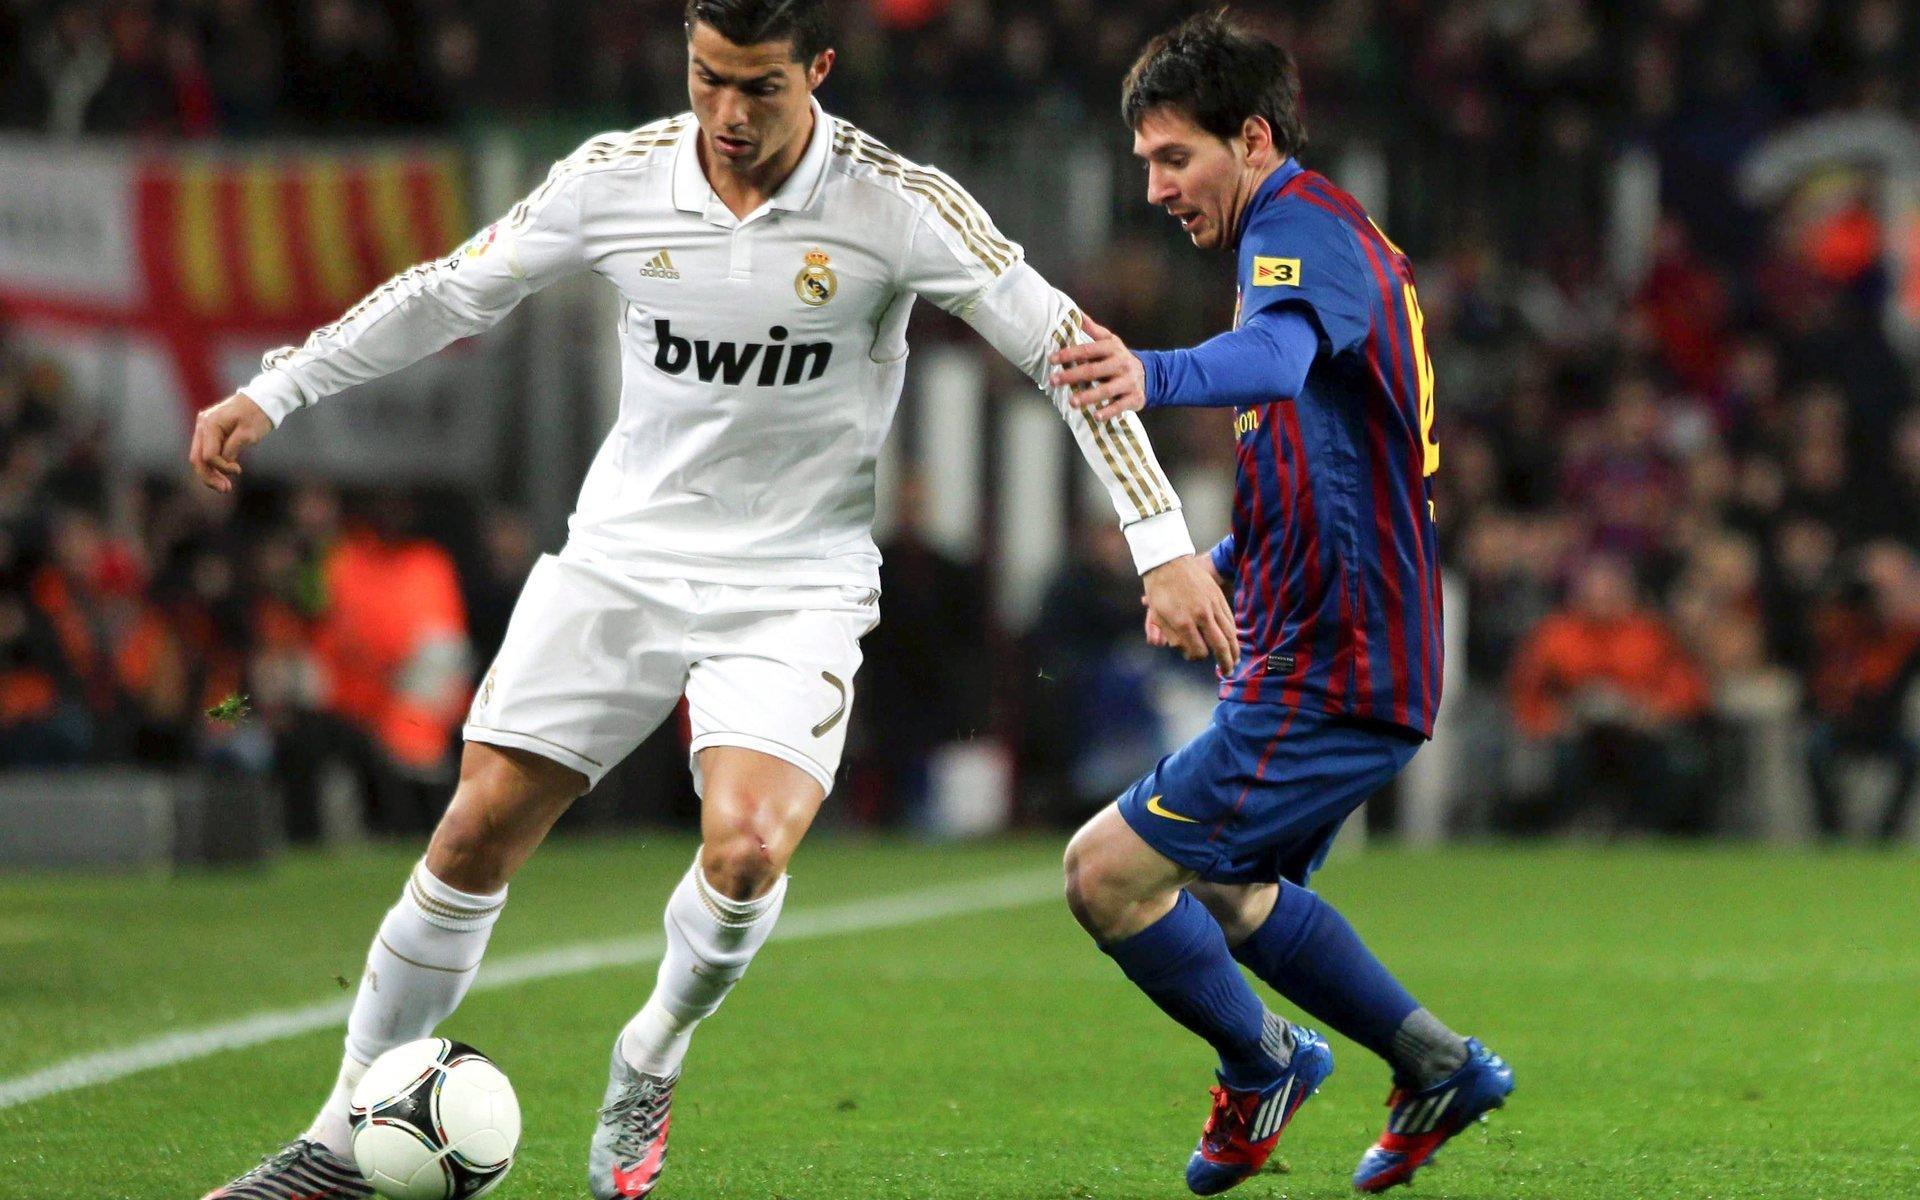 cool soccer wallpaper messi ronaldo wallpapers The rivalry between Cristiano Ronaldo and Lionel Messi is over